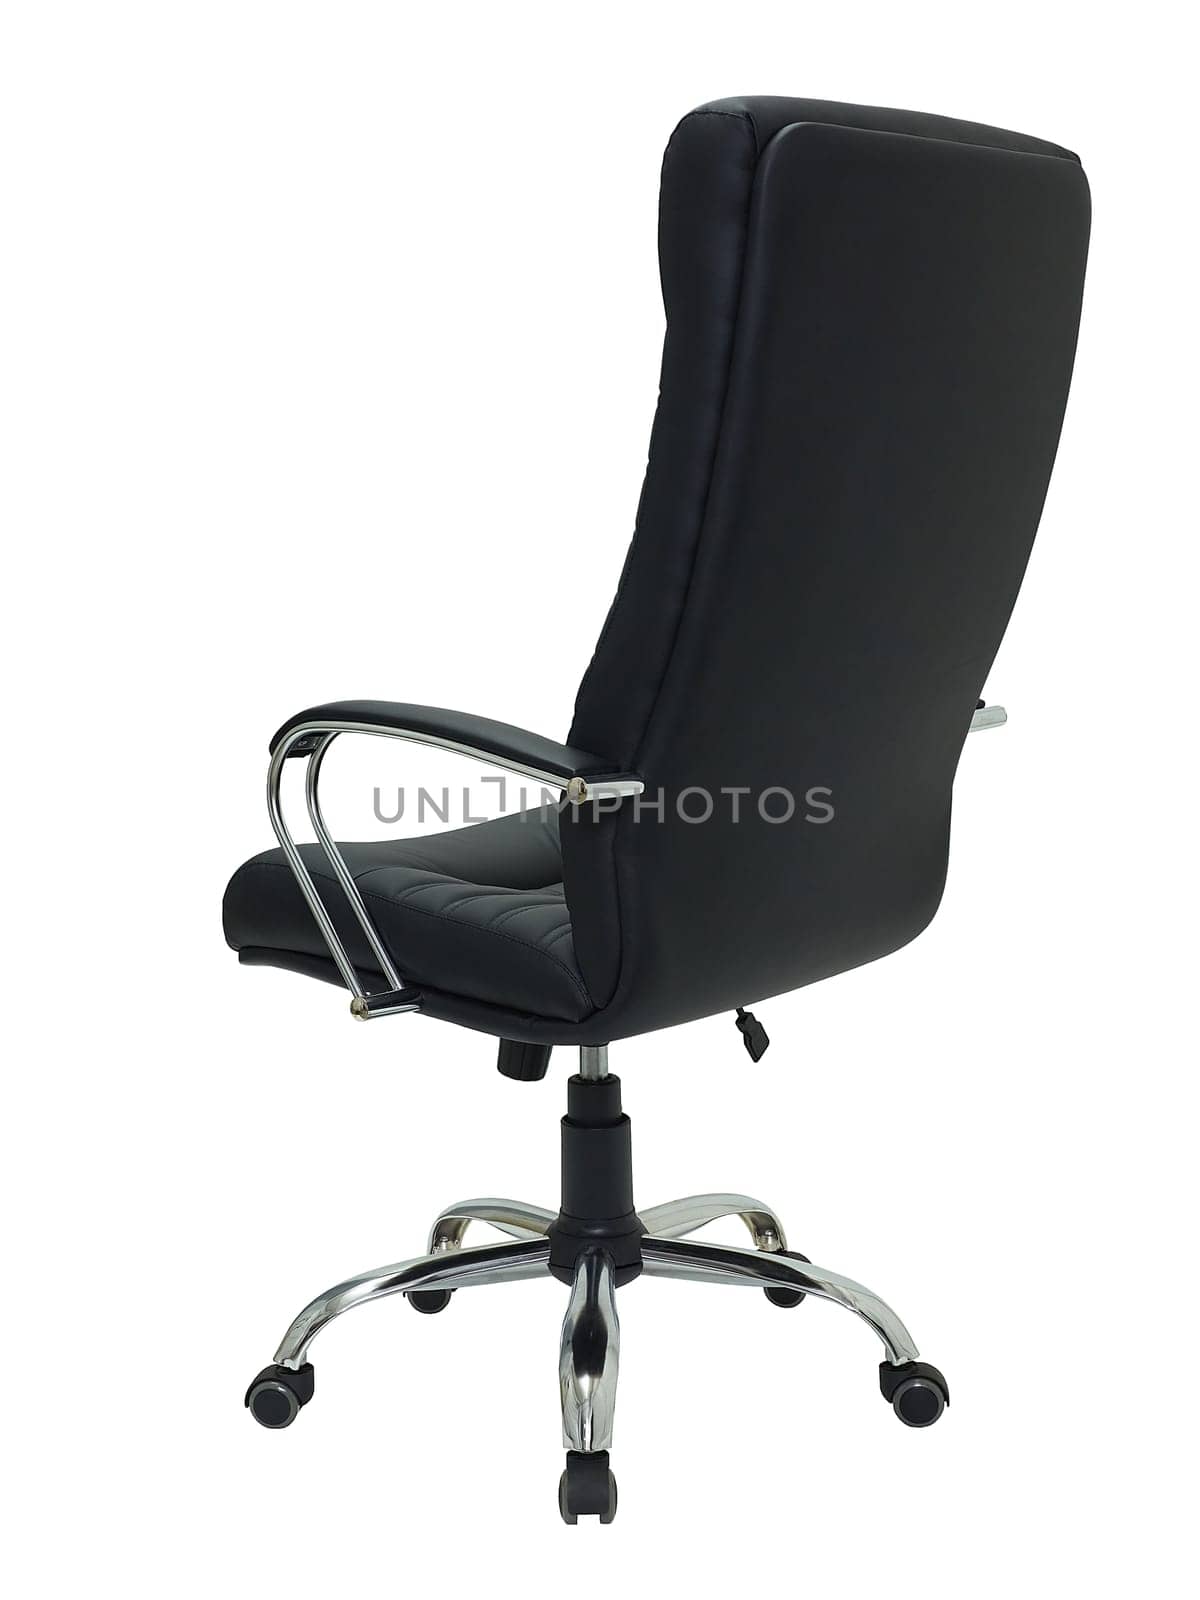 modern furniture in minimal style, interior, home design. black leather armchair on wheels isolated on white background, back view.